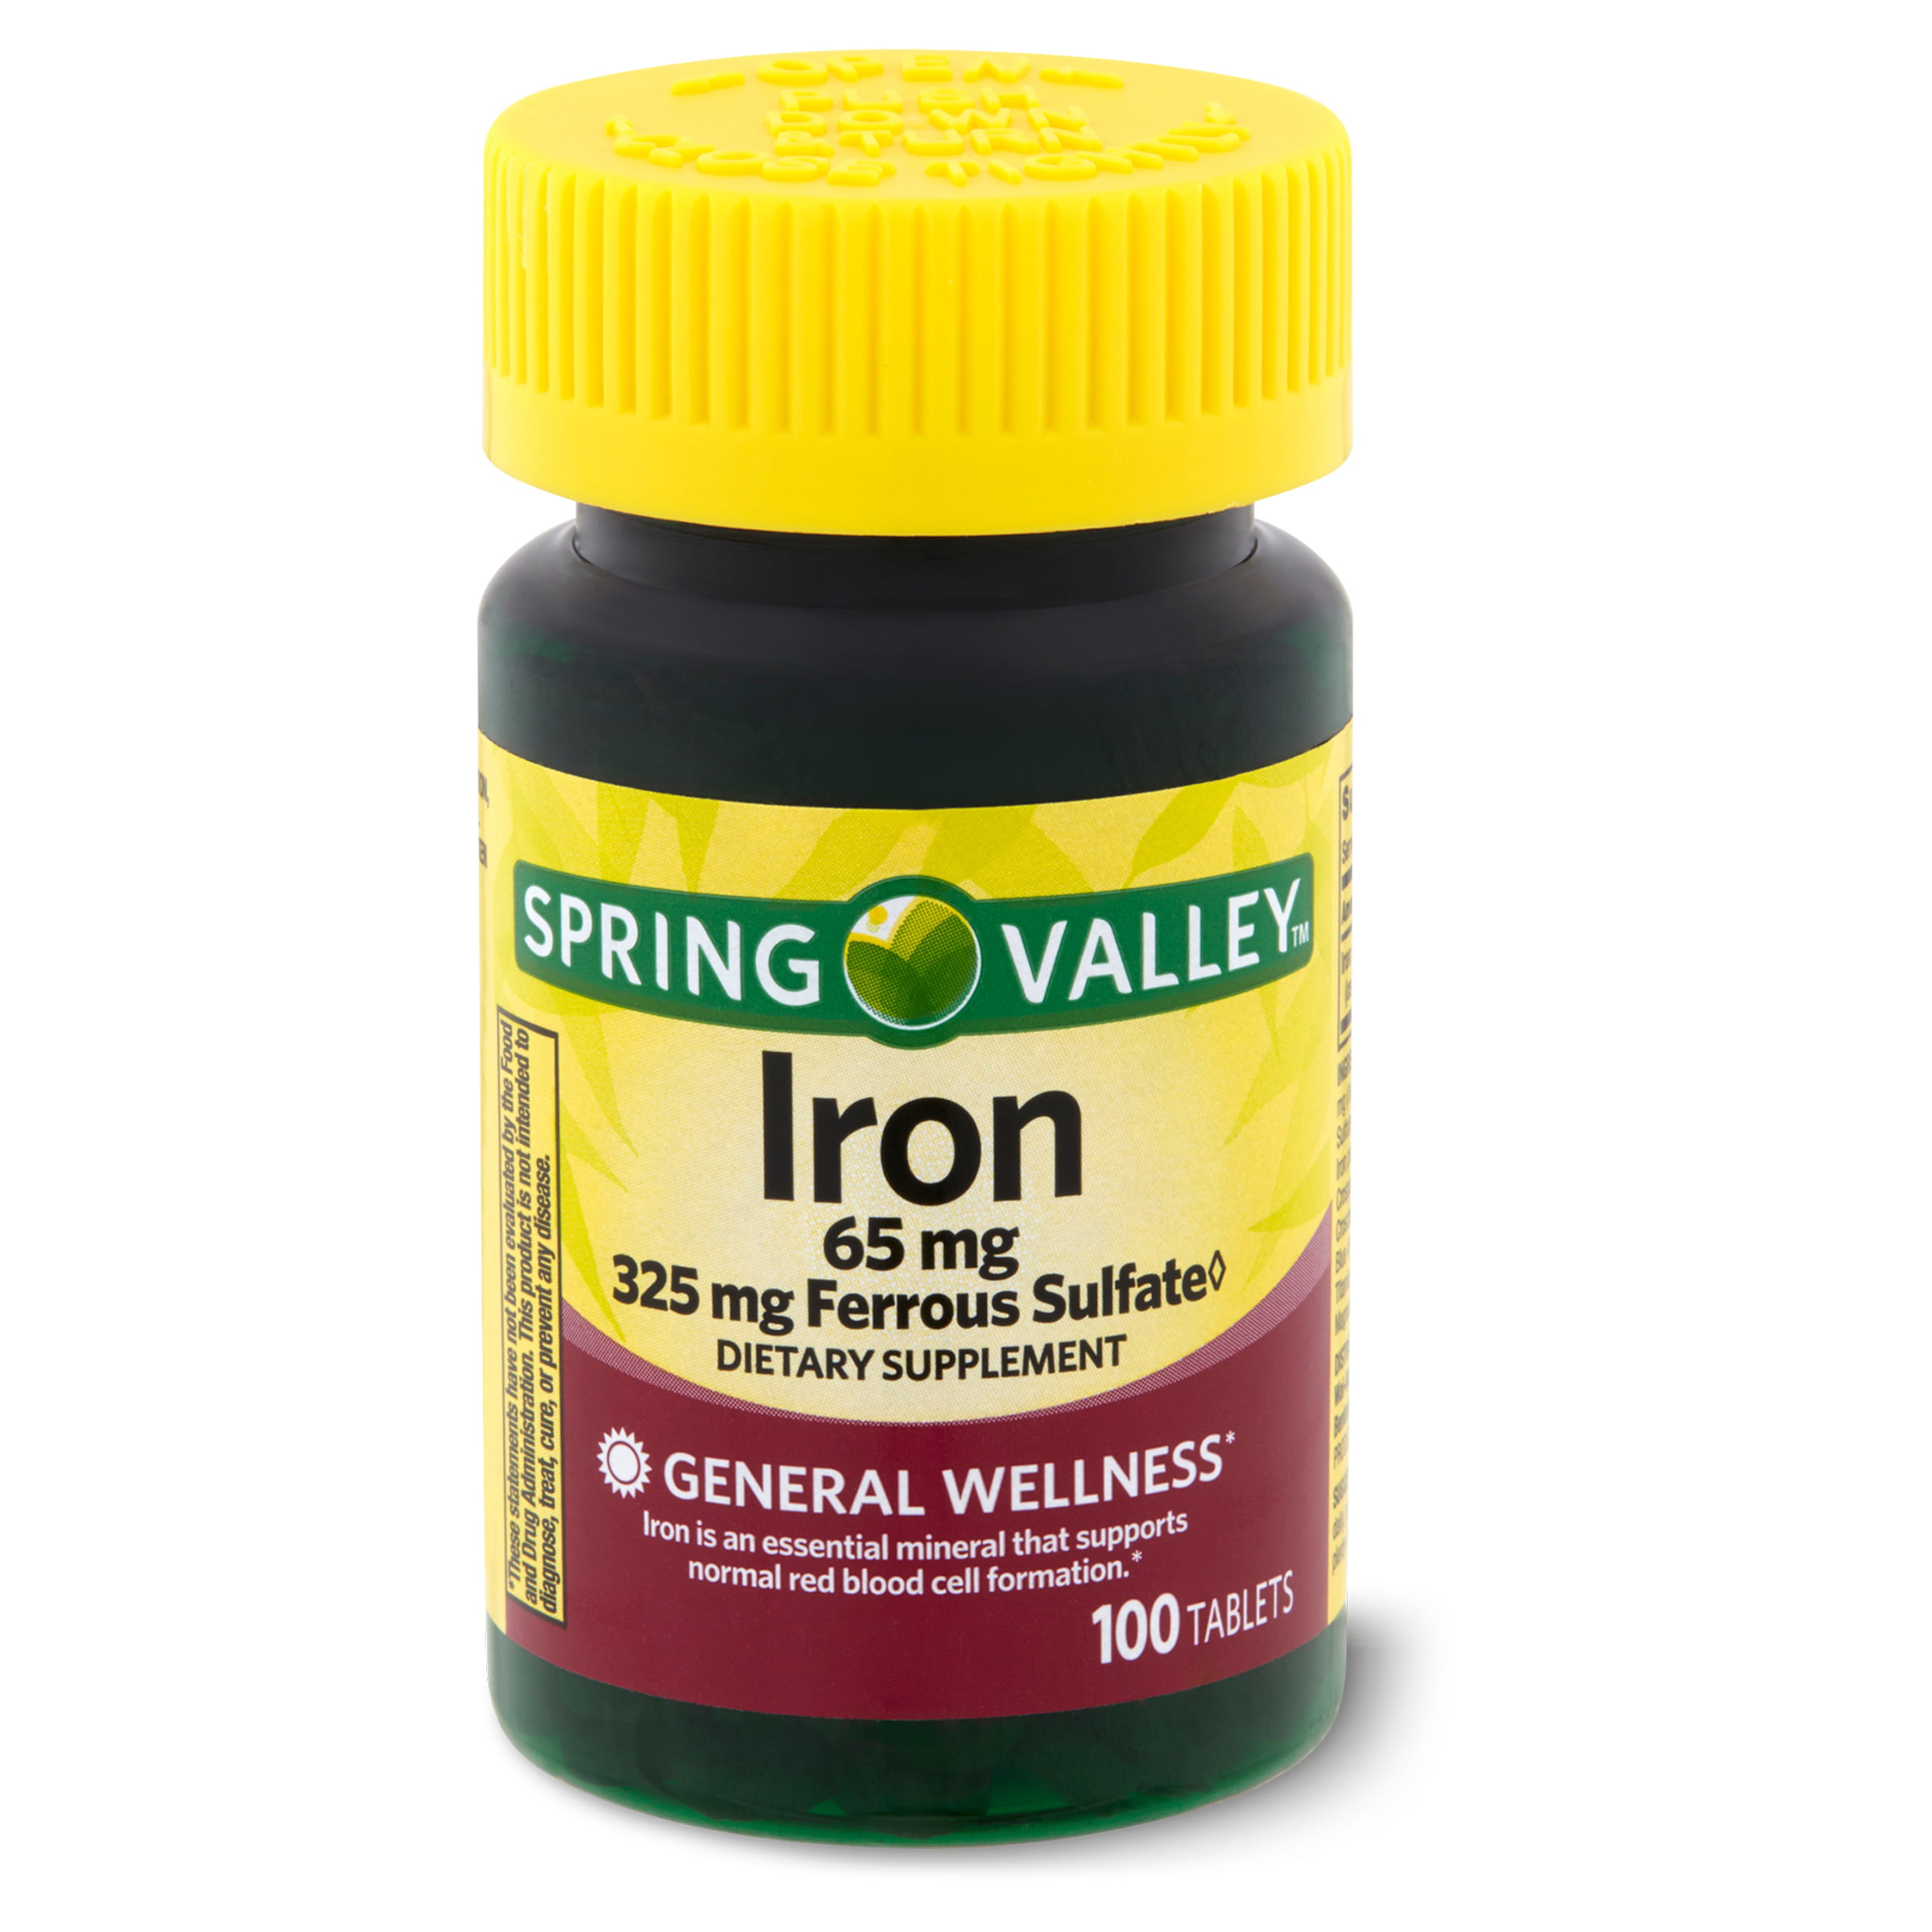 Spring Valley Iron Tablets, 65 mg, 100 Count